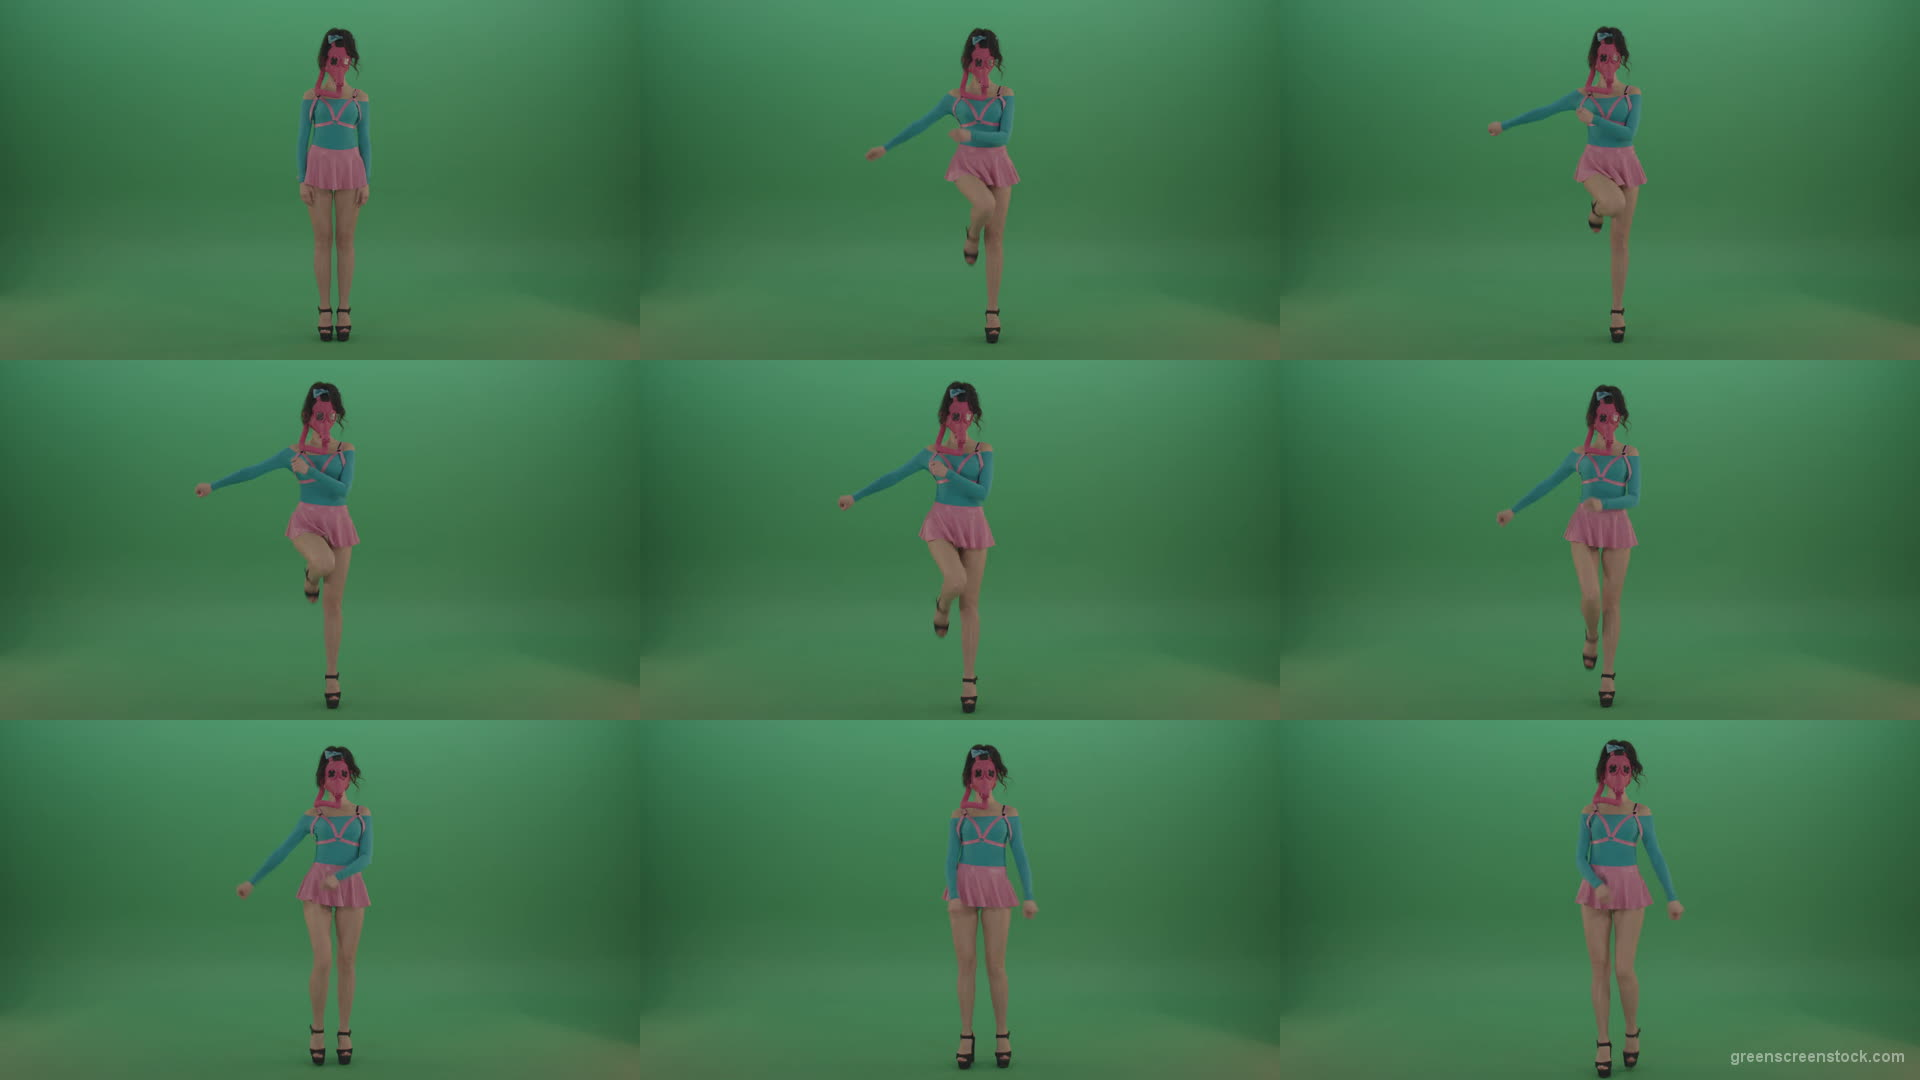 Sexy-Girl-in-Pink-Gas-Mask-marching-isolated-on-Green-Screen-4K-Video-Footage-1920 Green Screen Stock